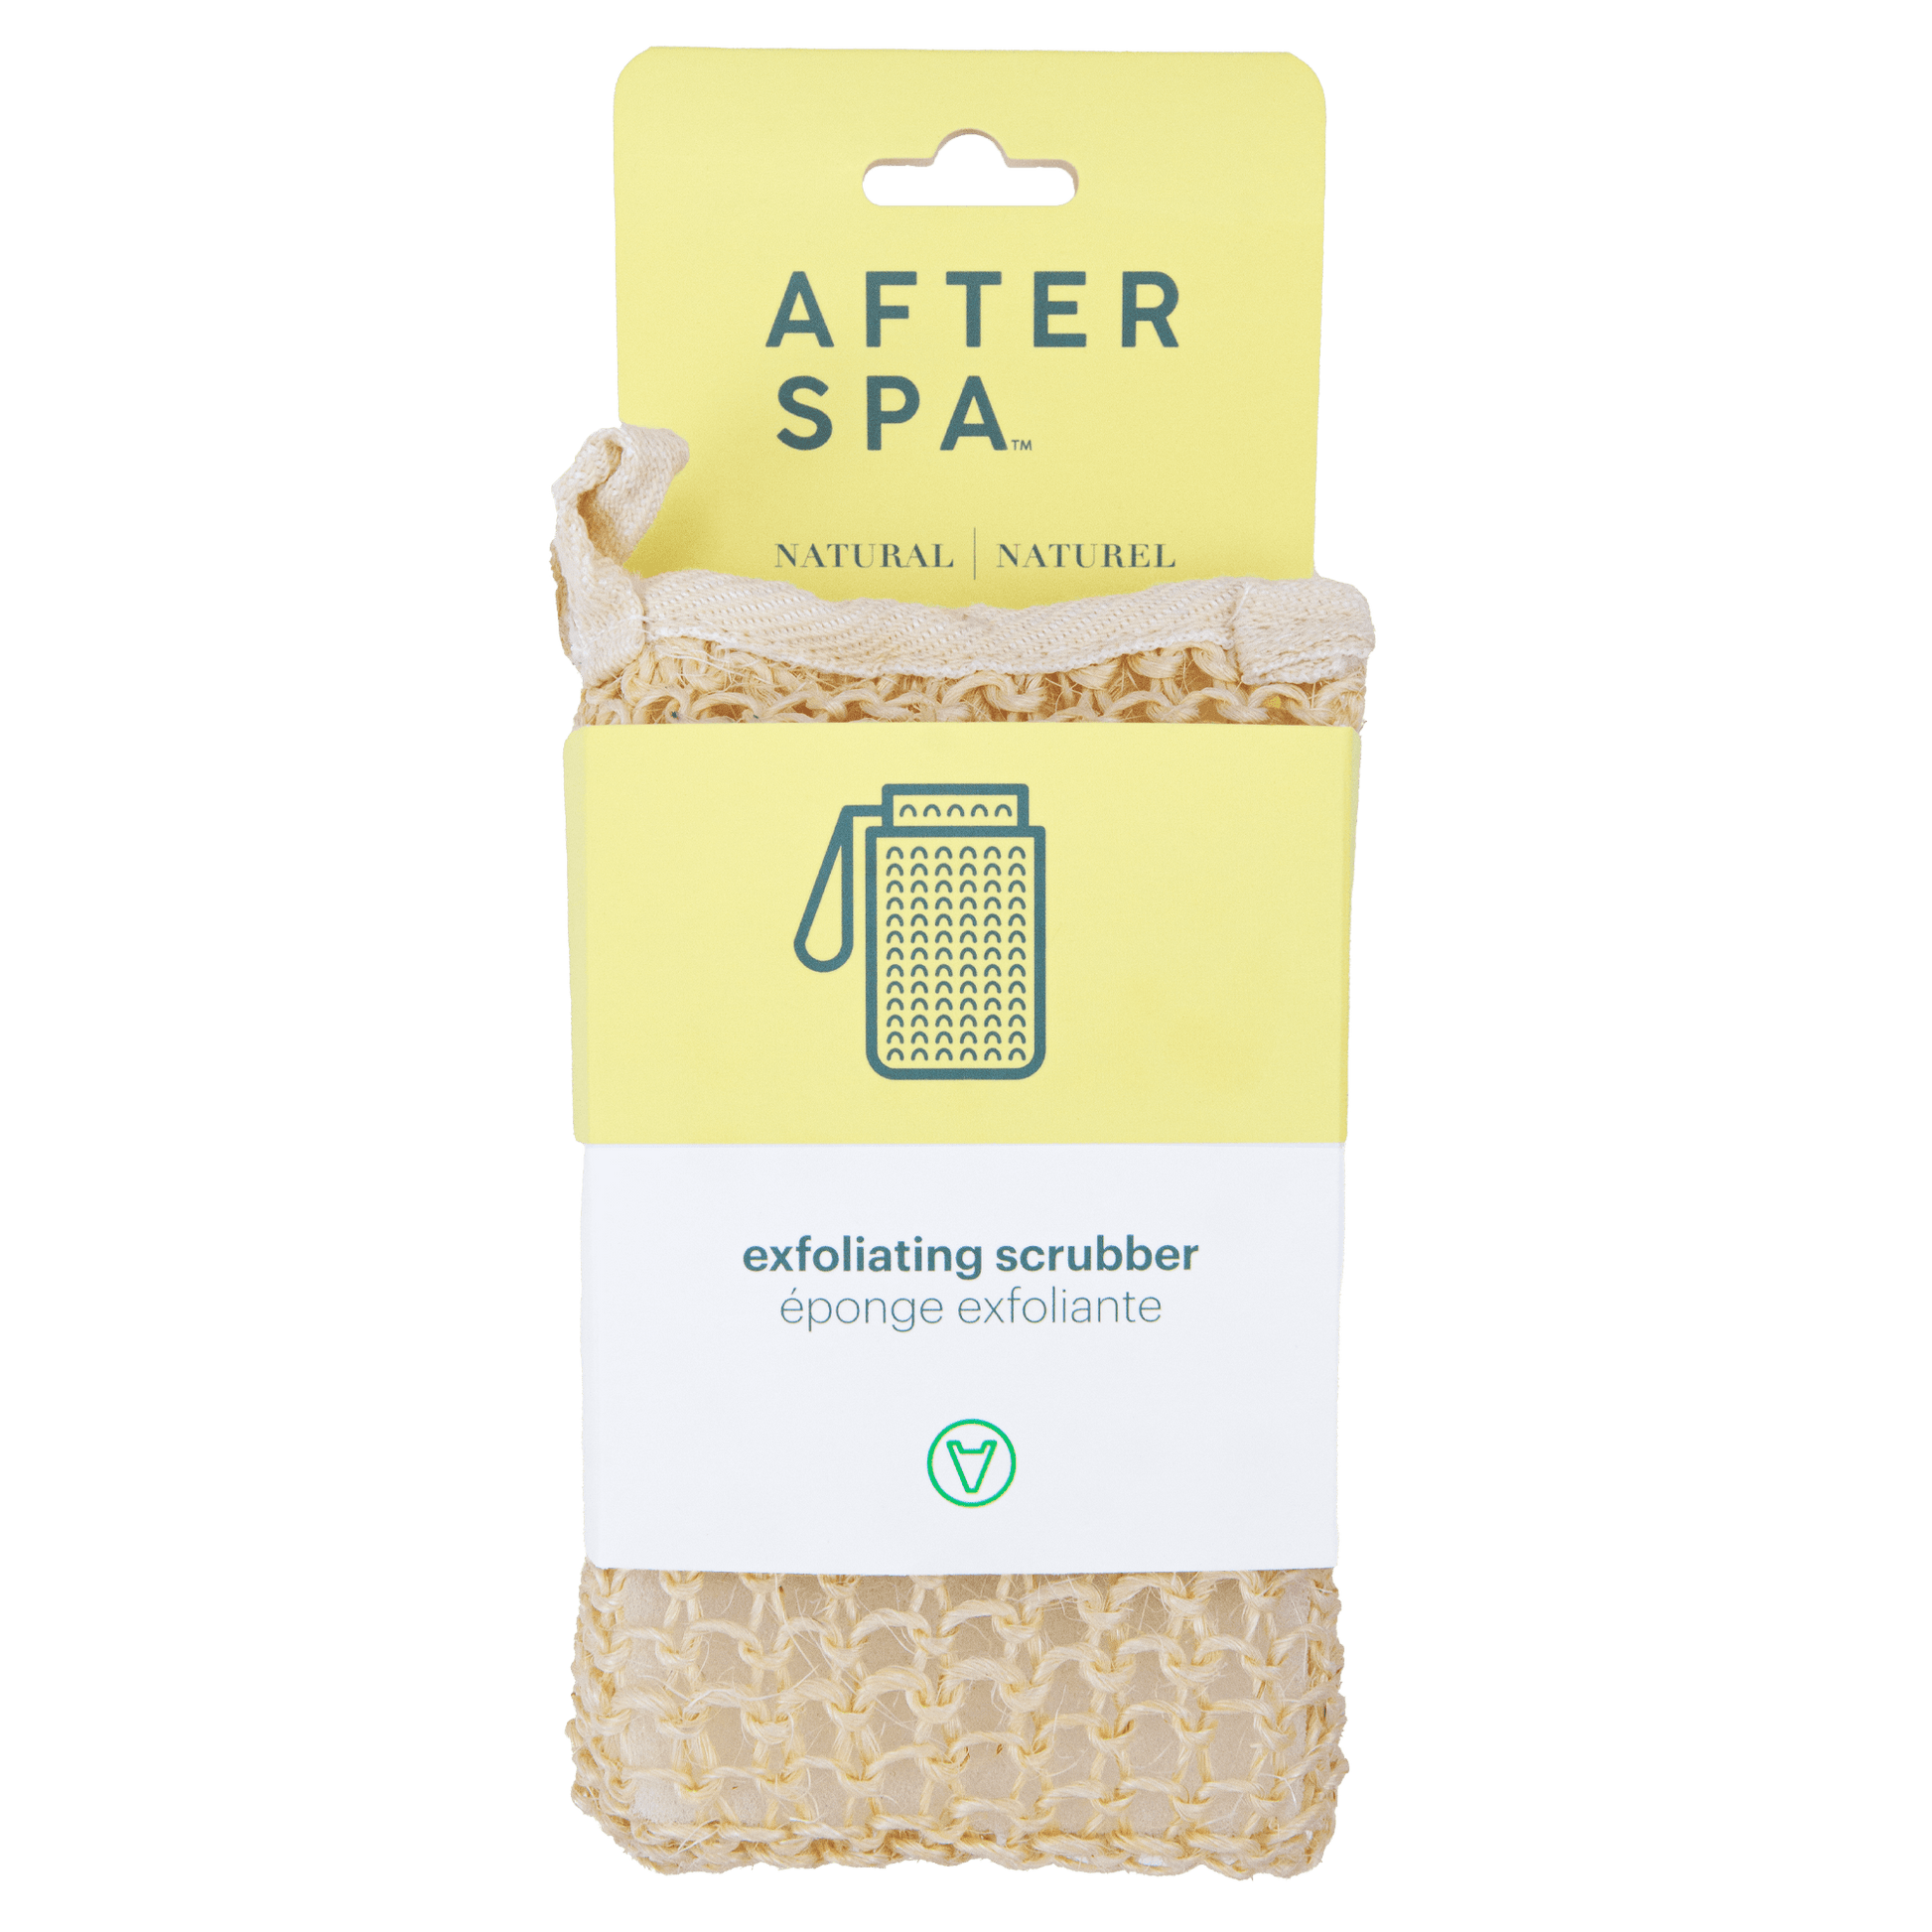 Afterspa Exfoliating Scrubber | Stimulates And Deeply Exfoliates